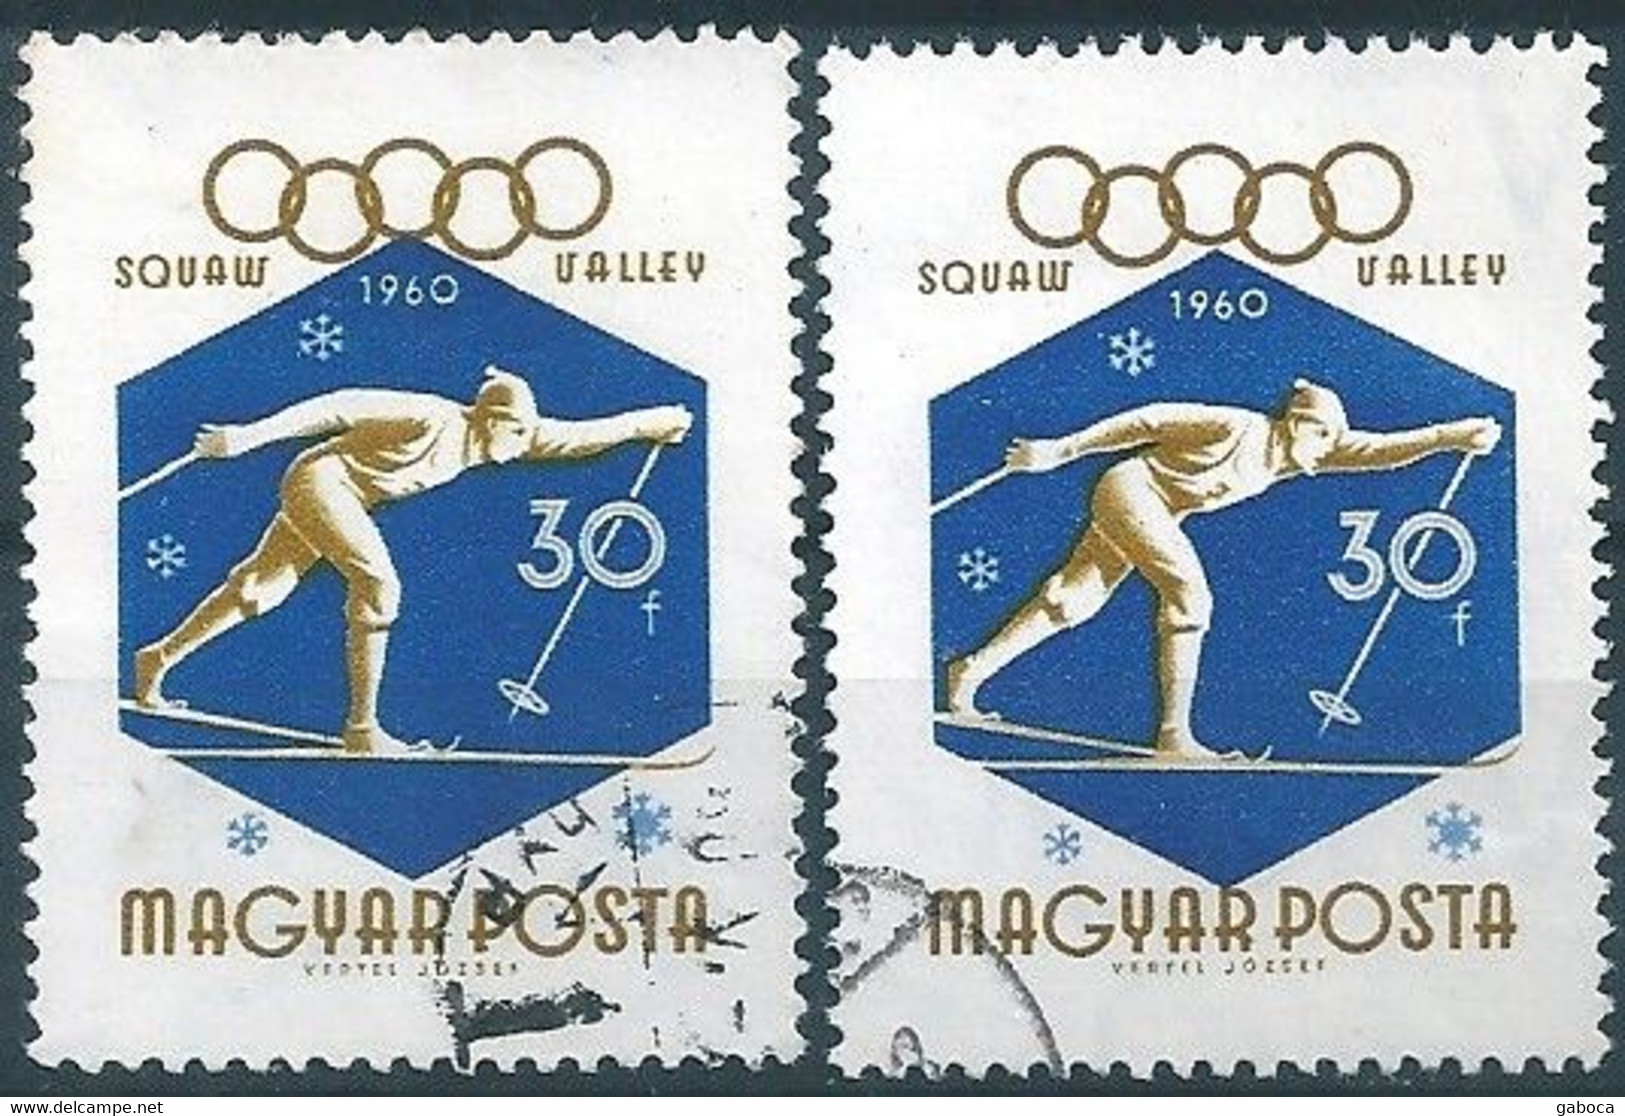 C1003 Hungary Winter Olympic Squaw Valley Sport Skiing Used ERROR - Winter 1960: Squaw Valley